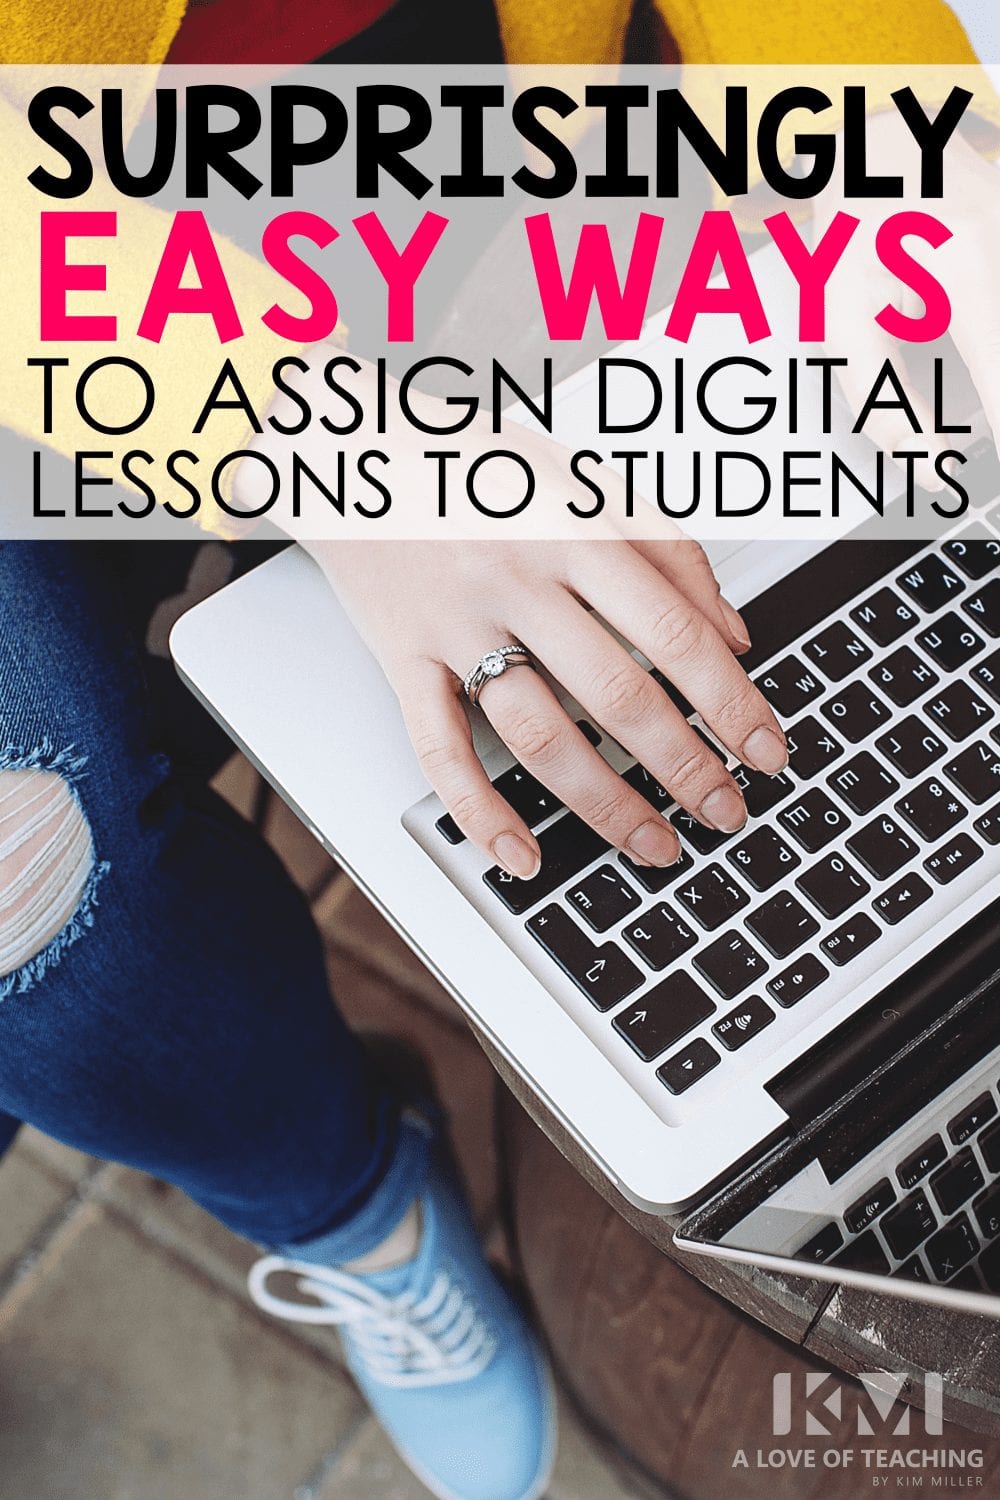 Surprisingly easy ways to assign digital lessons to students!